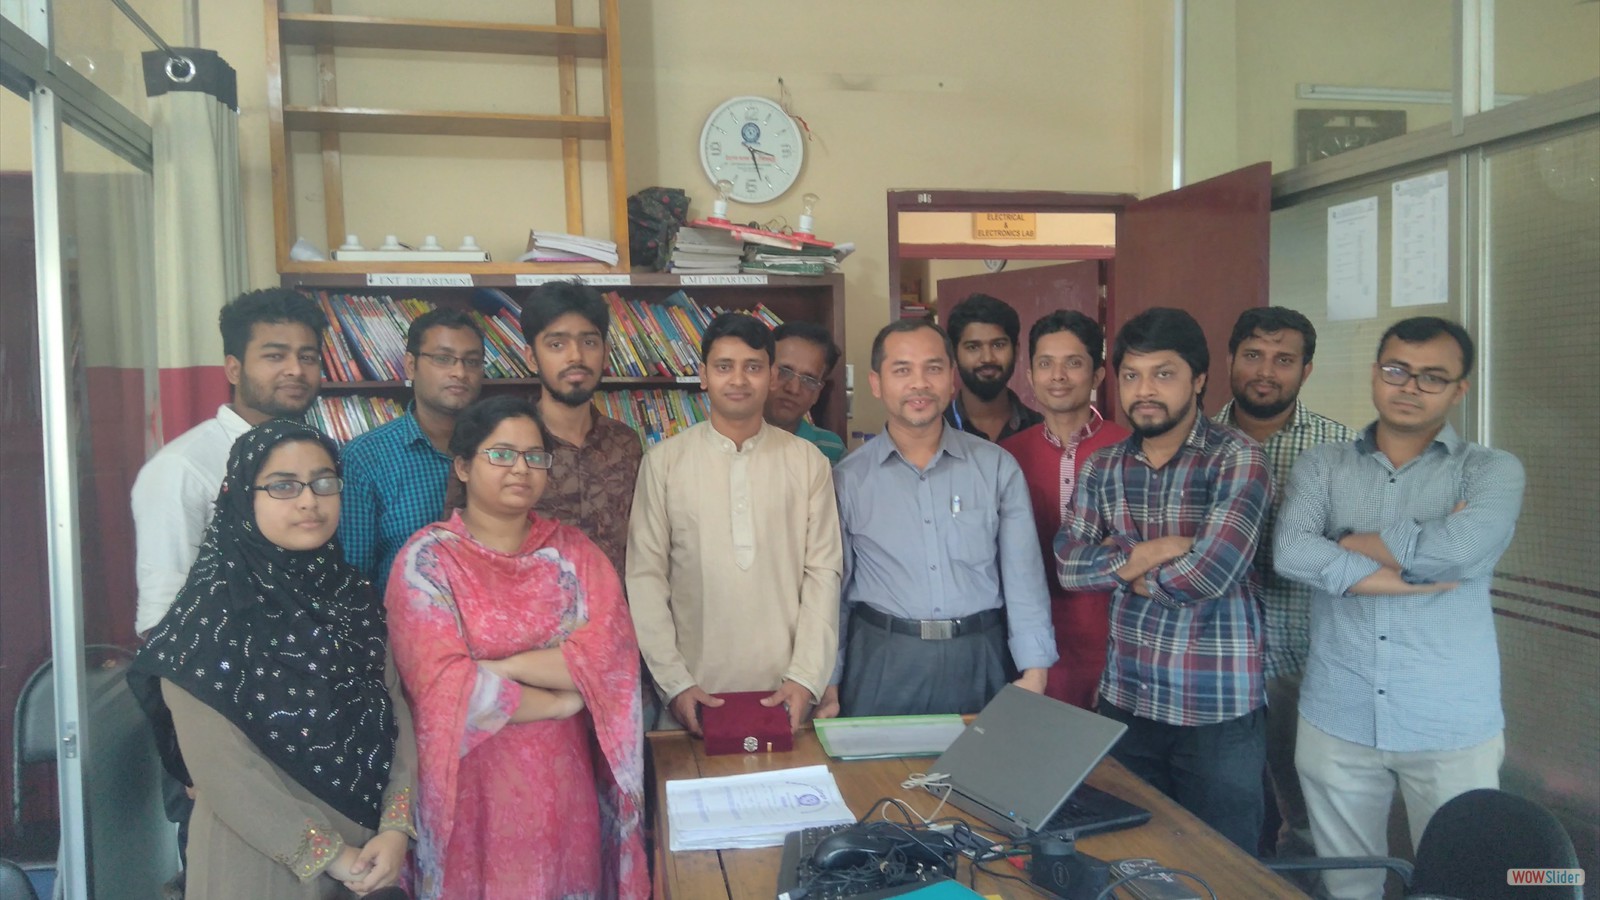 Farewell of Eng Murshedul Hoque , Instructor, Electrical Technology